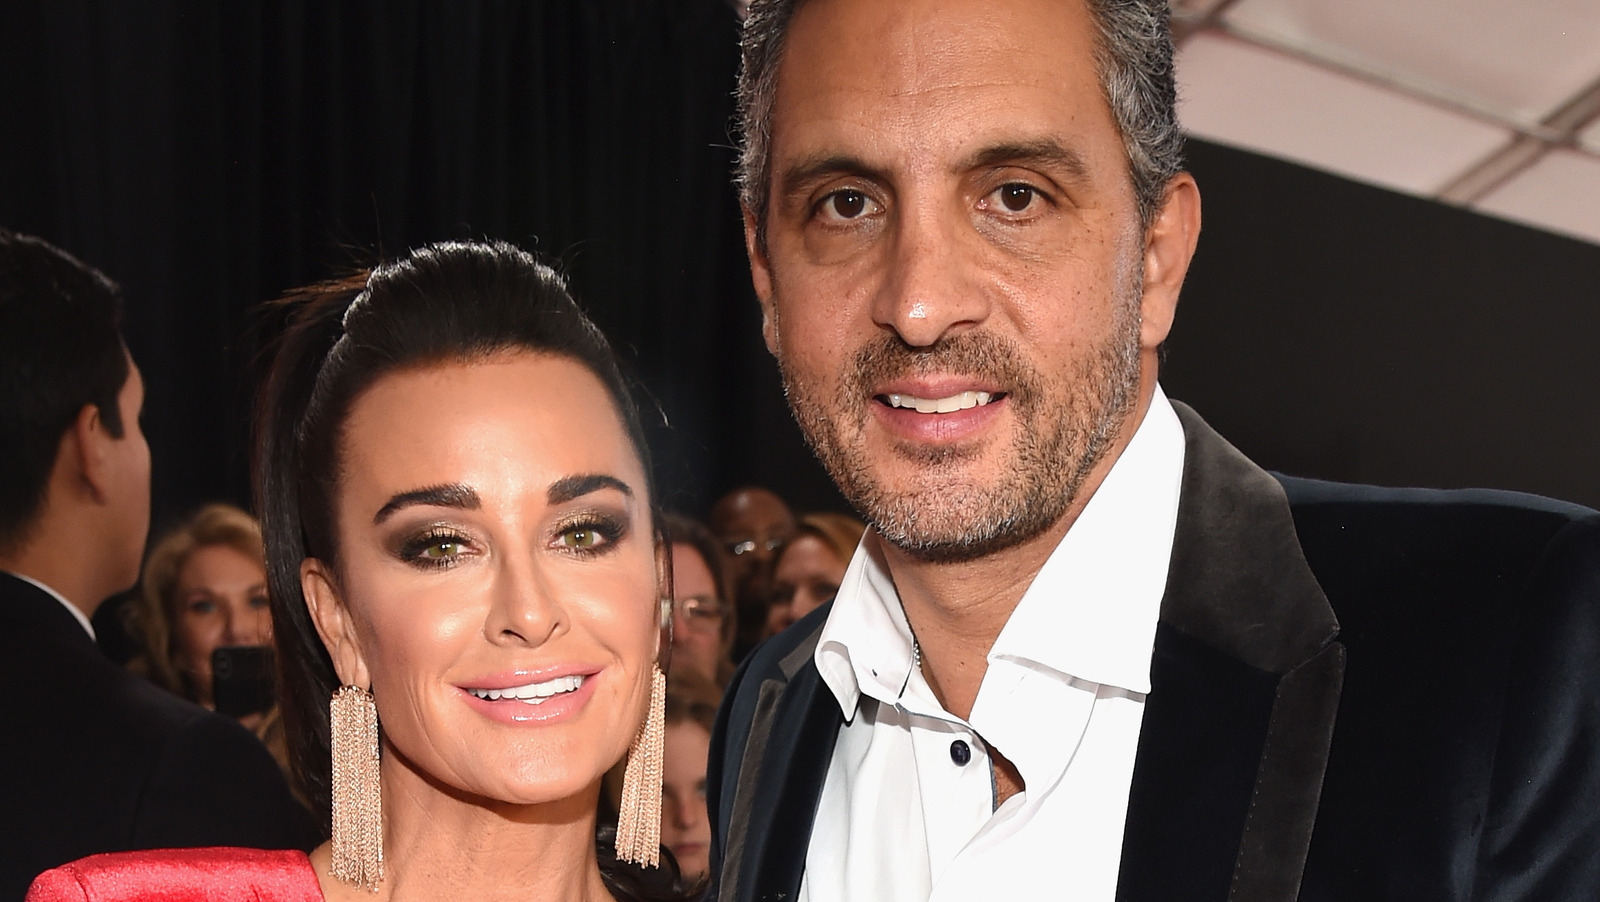 Kyle Richards' husband and daughters to star in new Netflix reality show